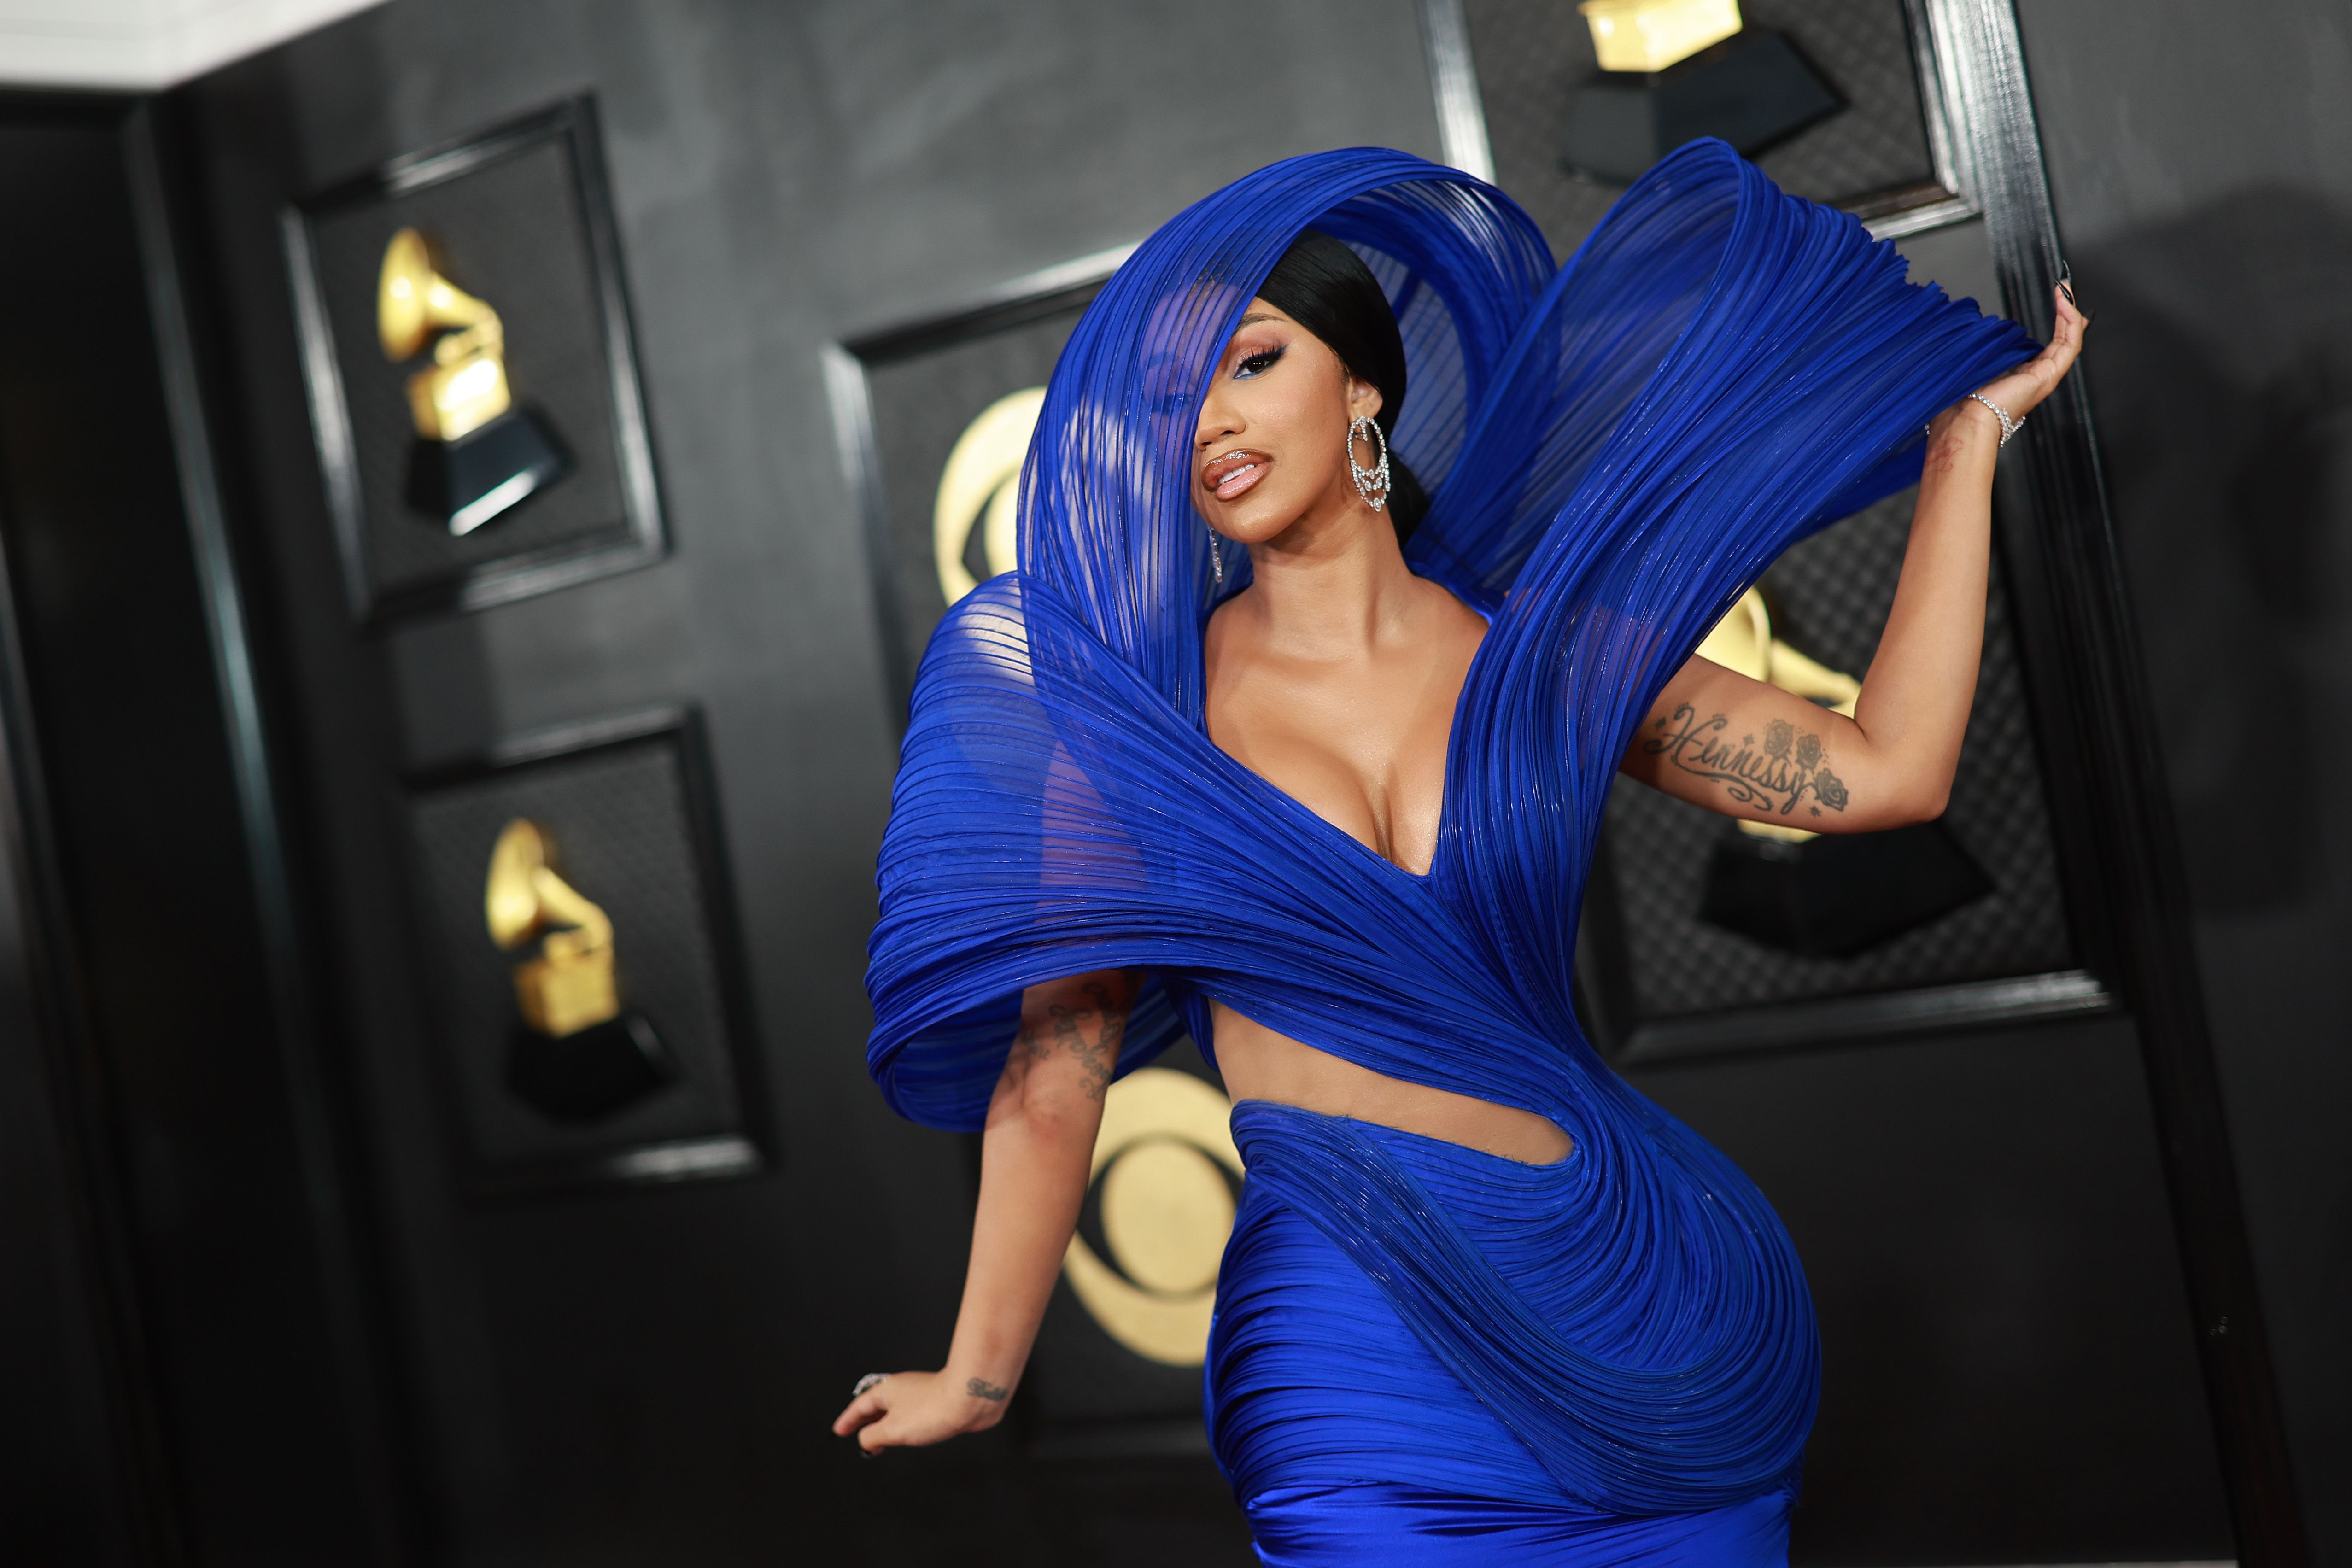 The 13 Best-Dressed Stars at the 2023 Grammys